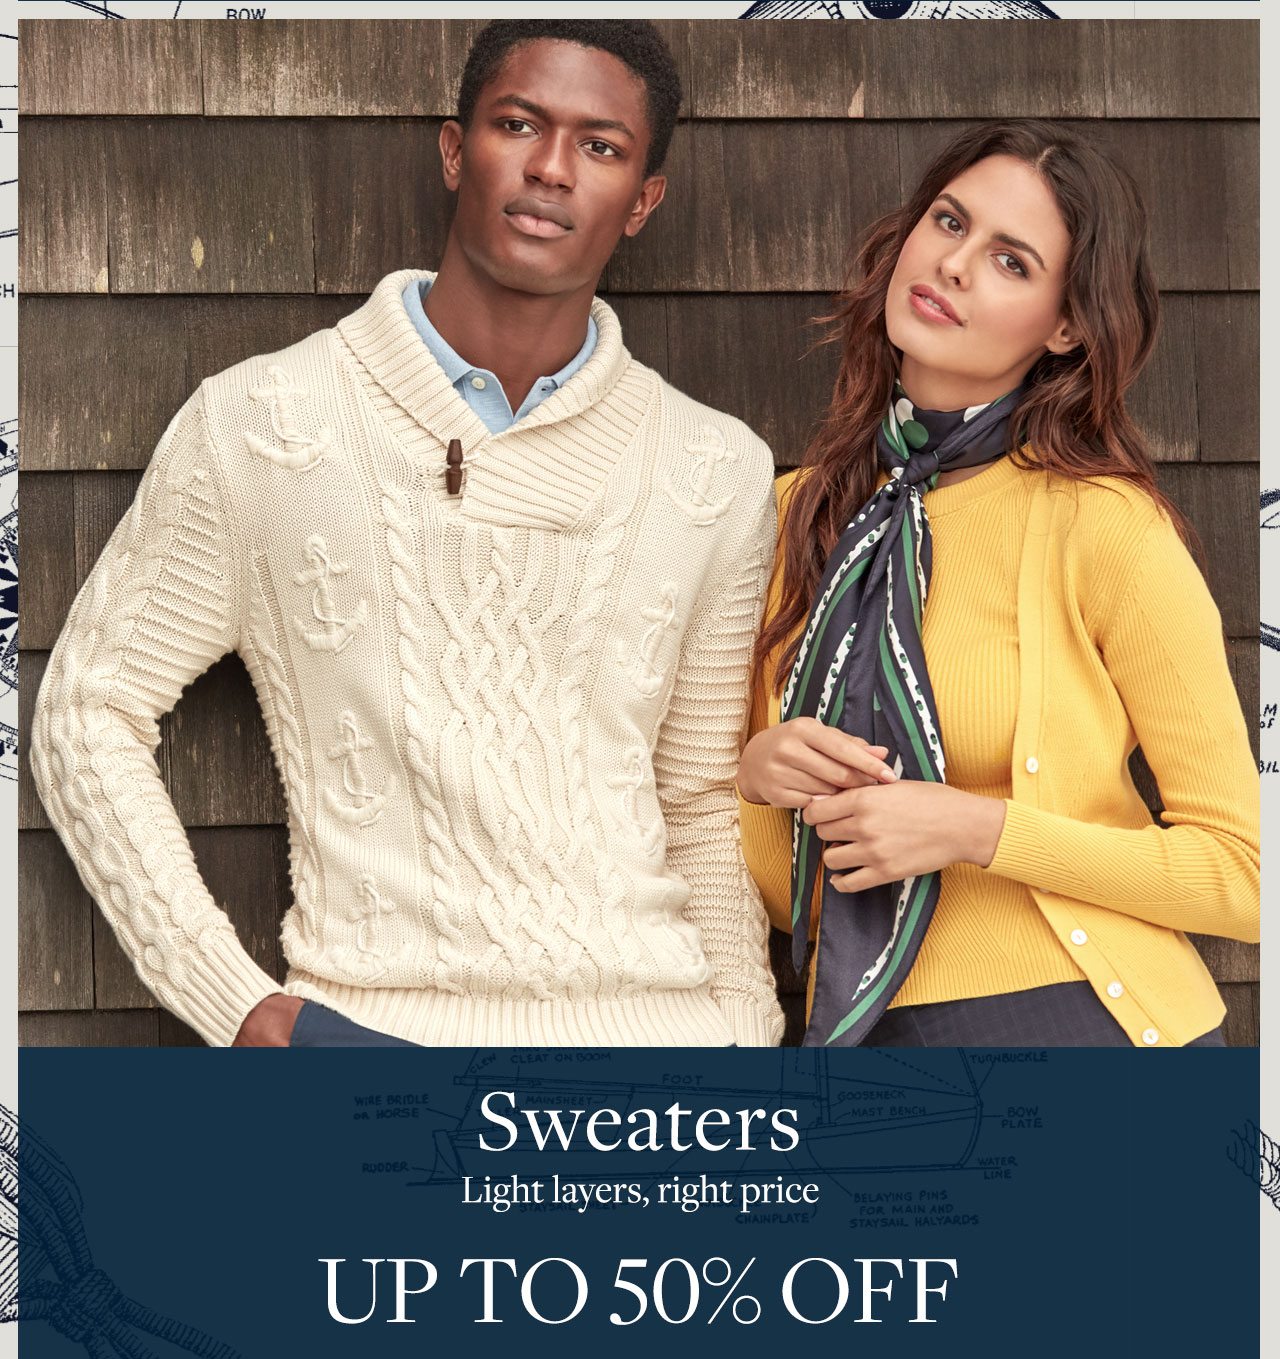 Sweaters Light layers, right price up to 50% off